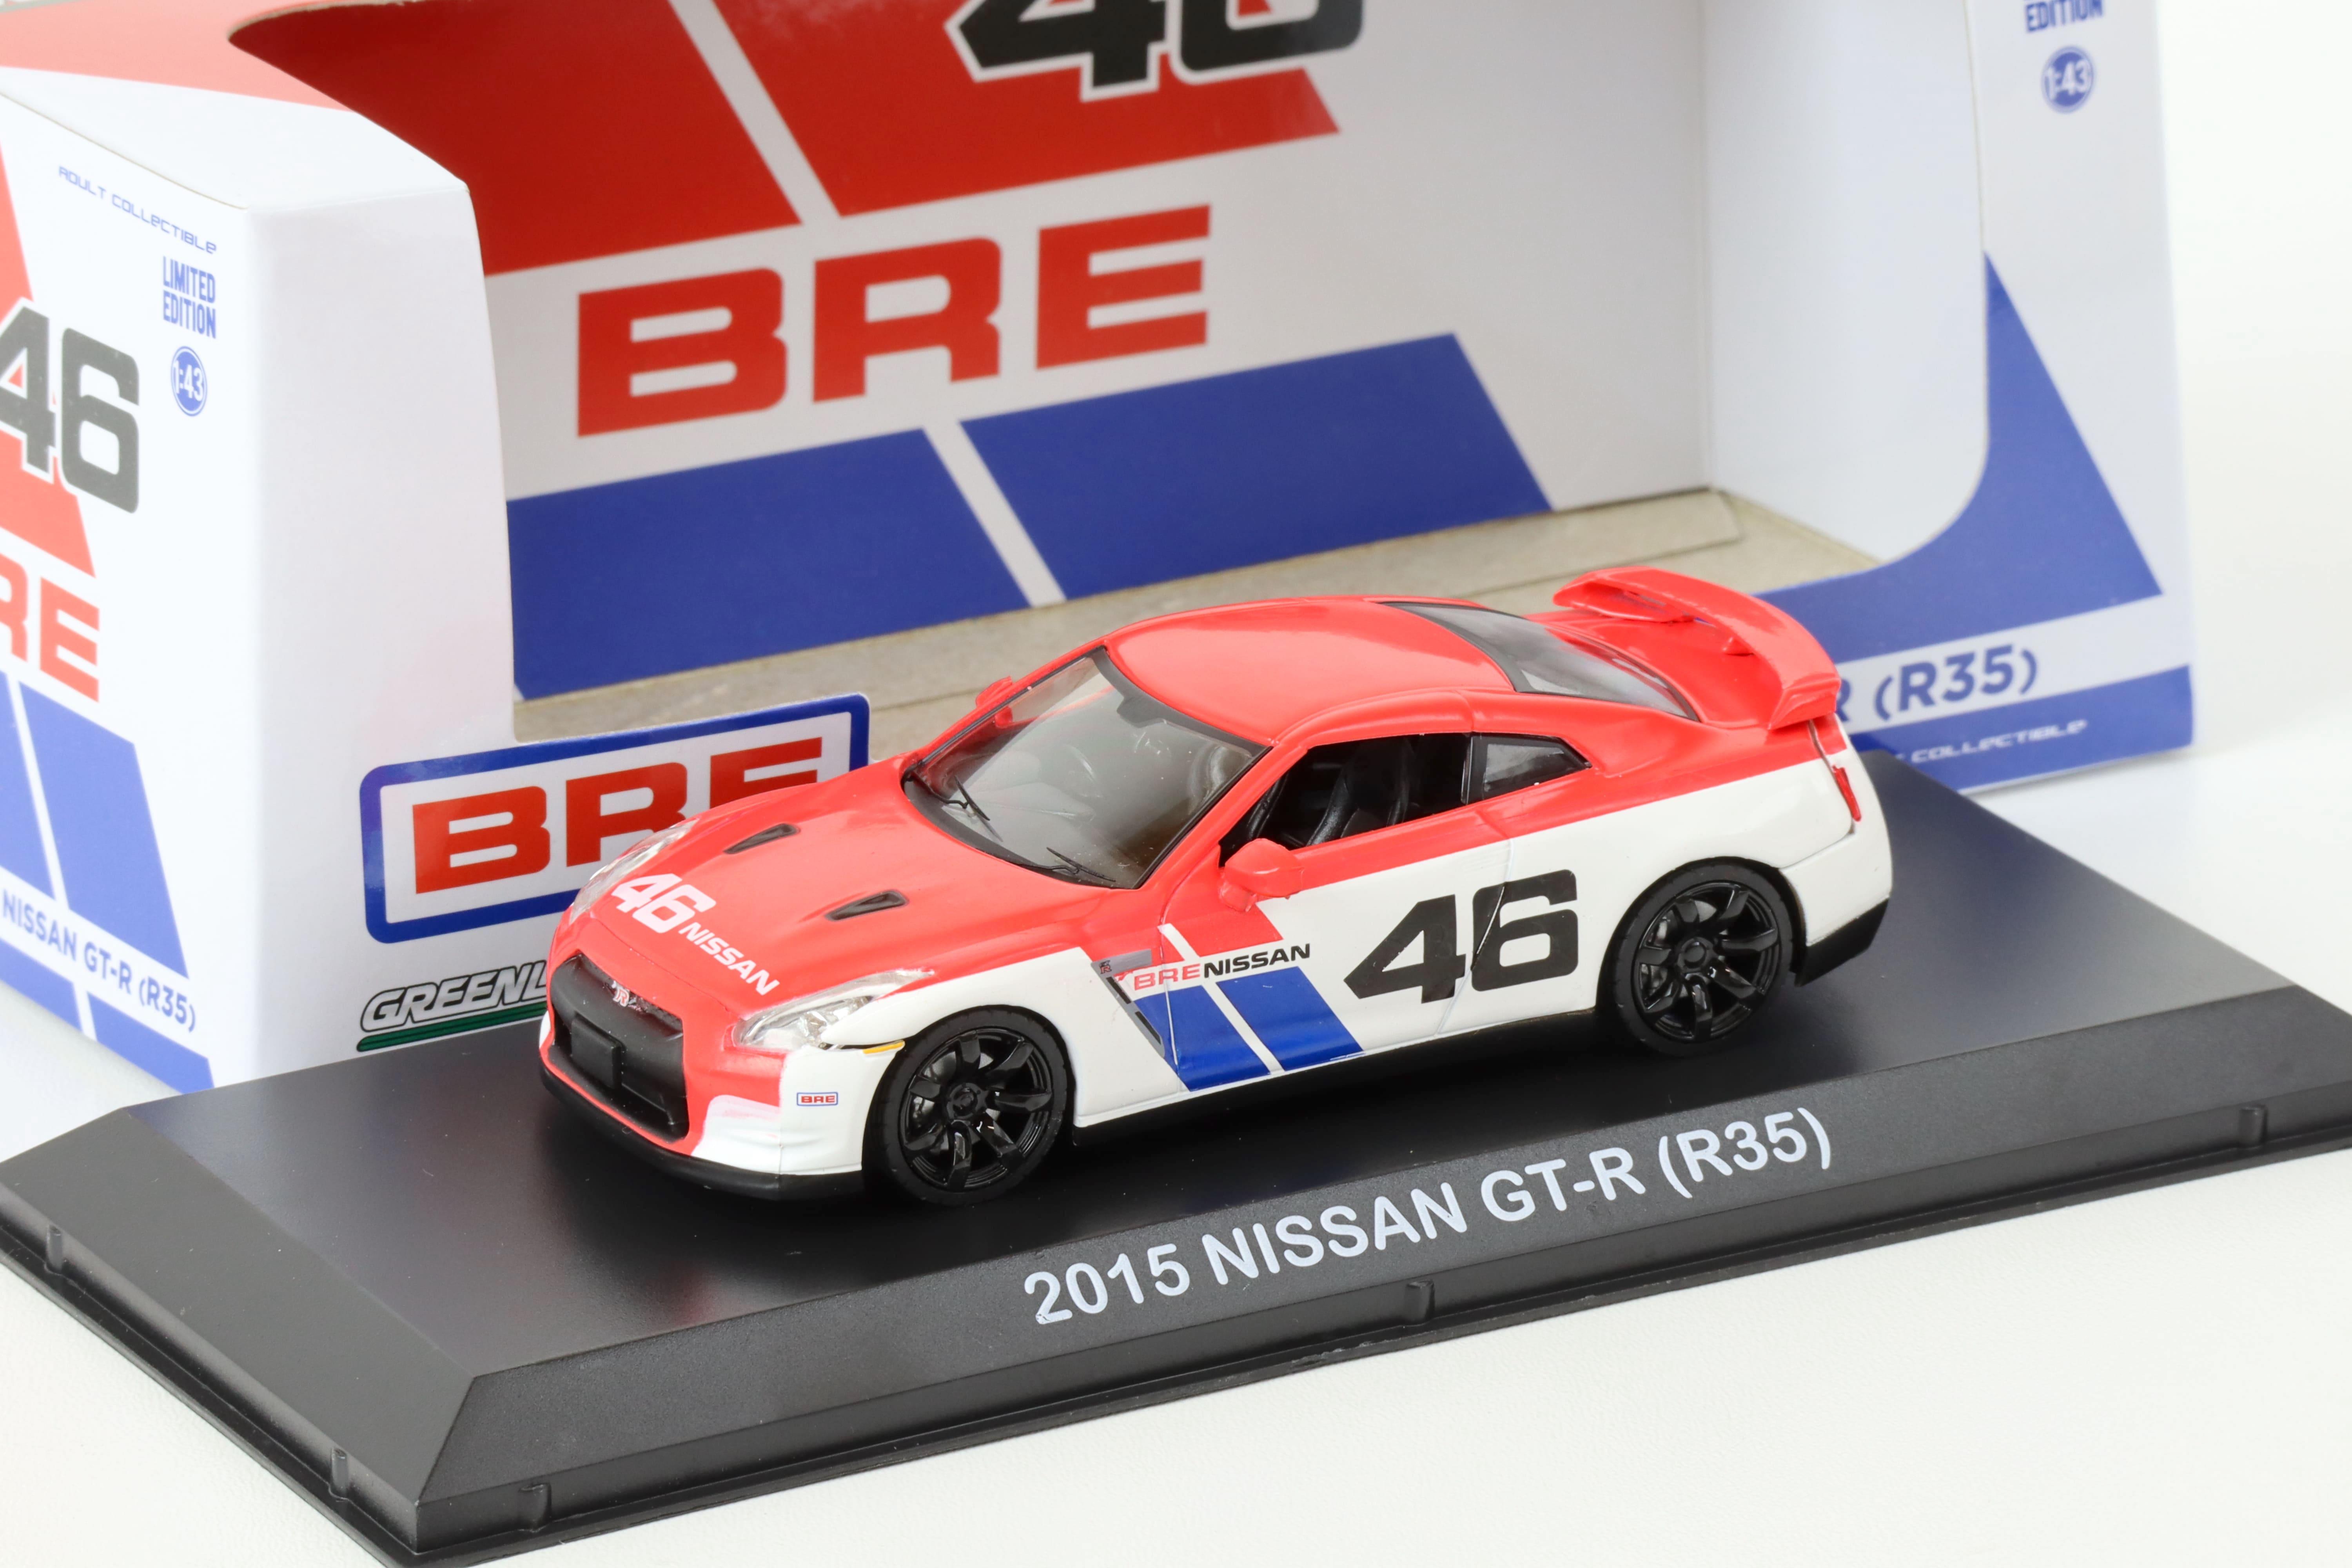 1:43 Greenlight 2015 Nissan GT-R (R35) Coupe BRE #46 white/ red